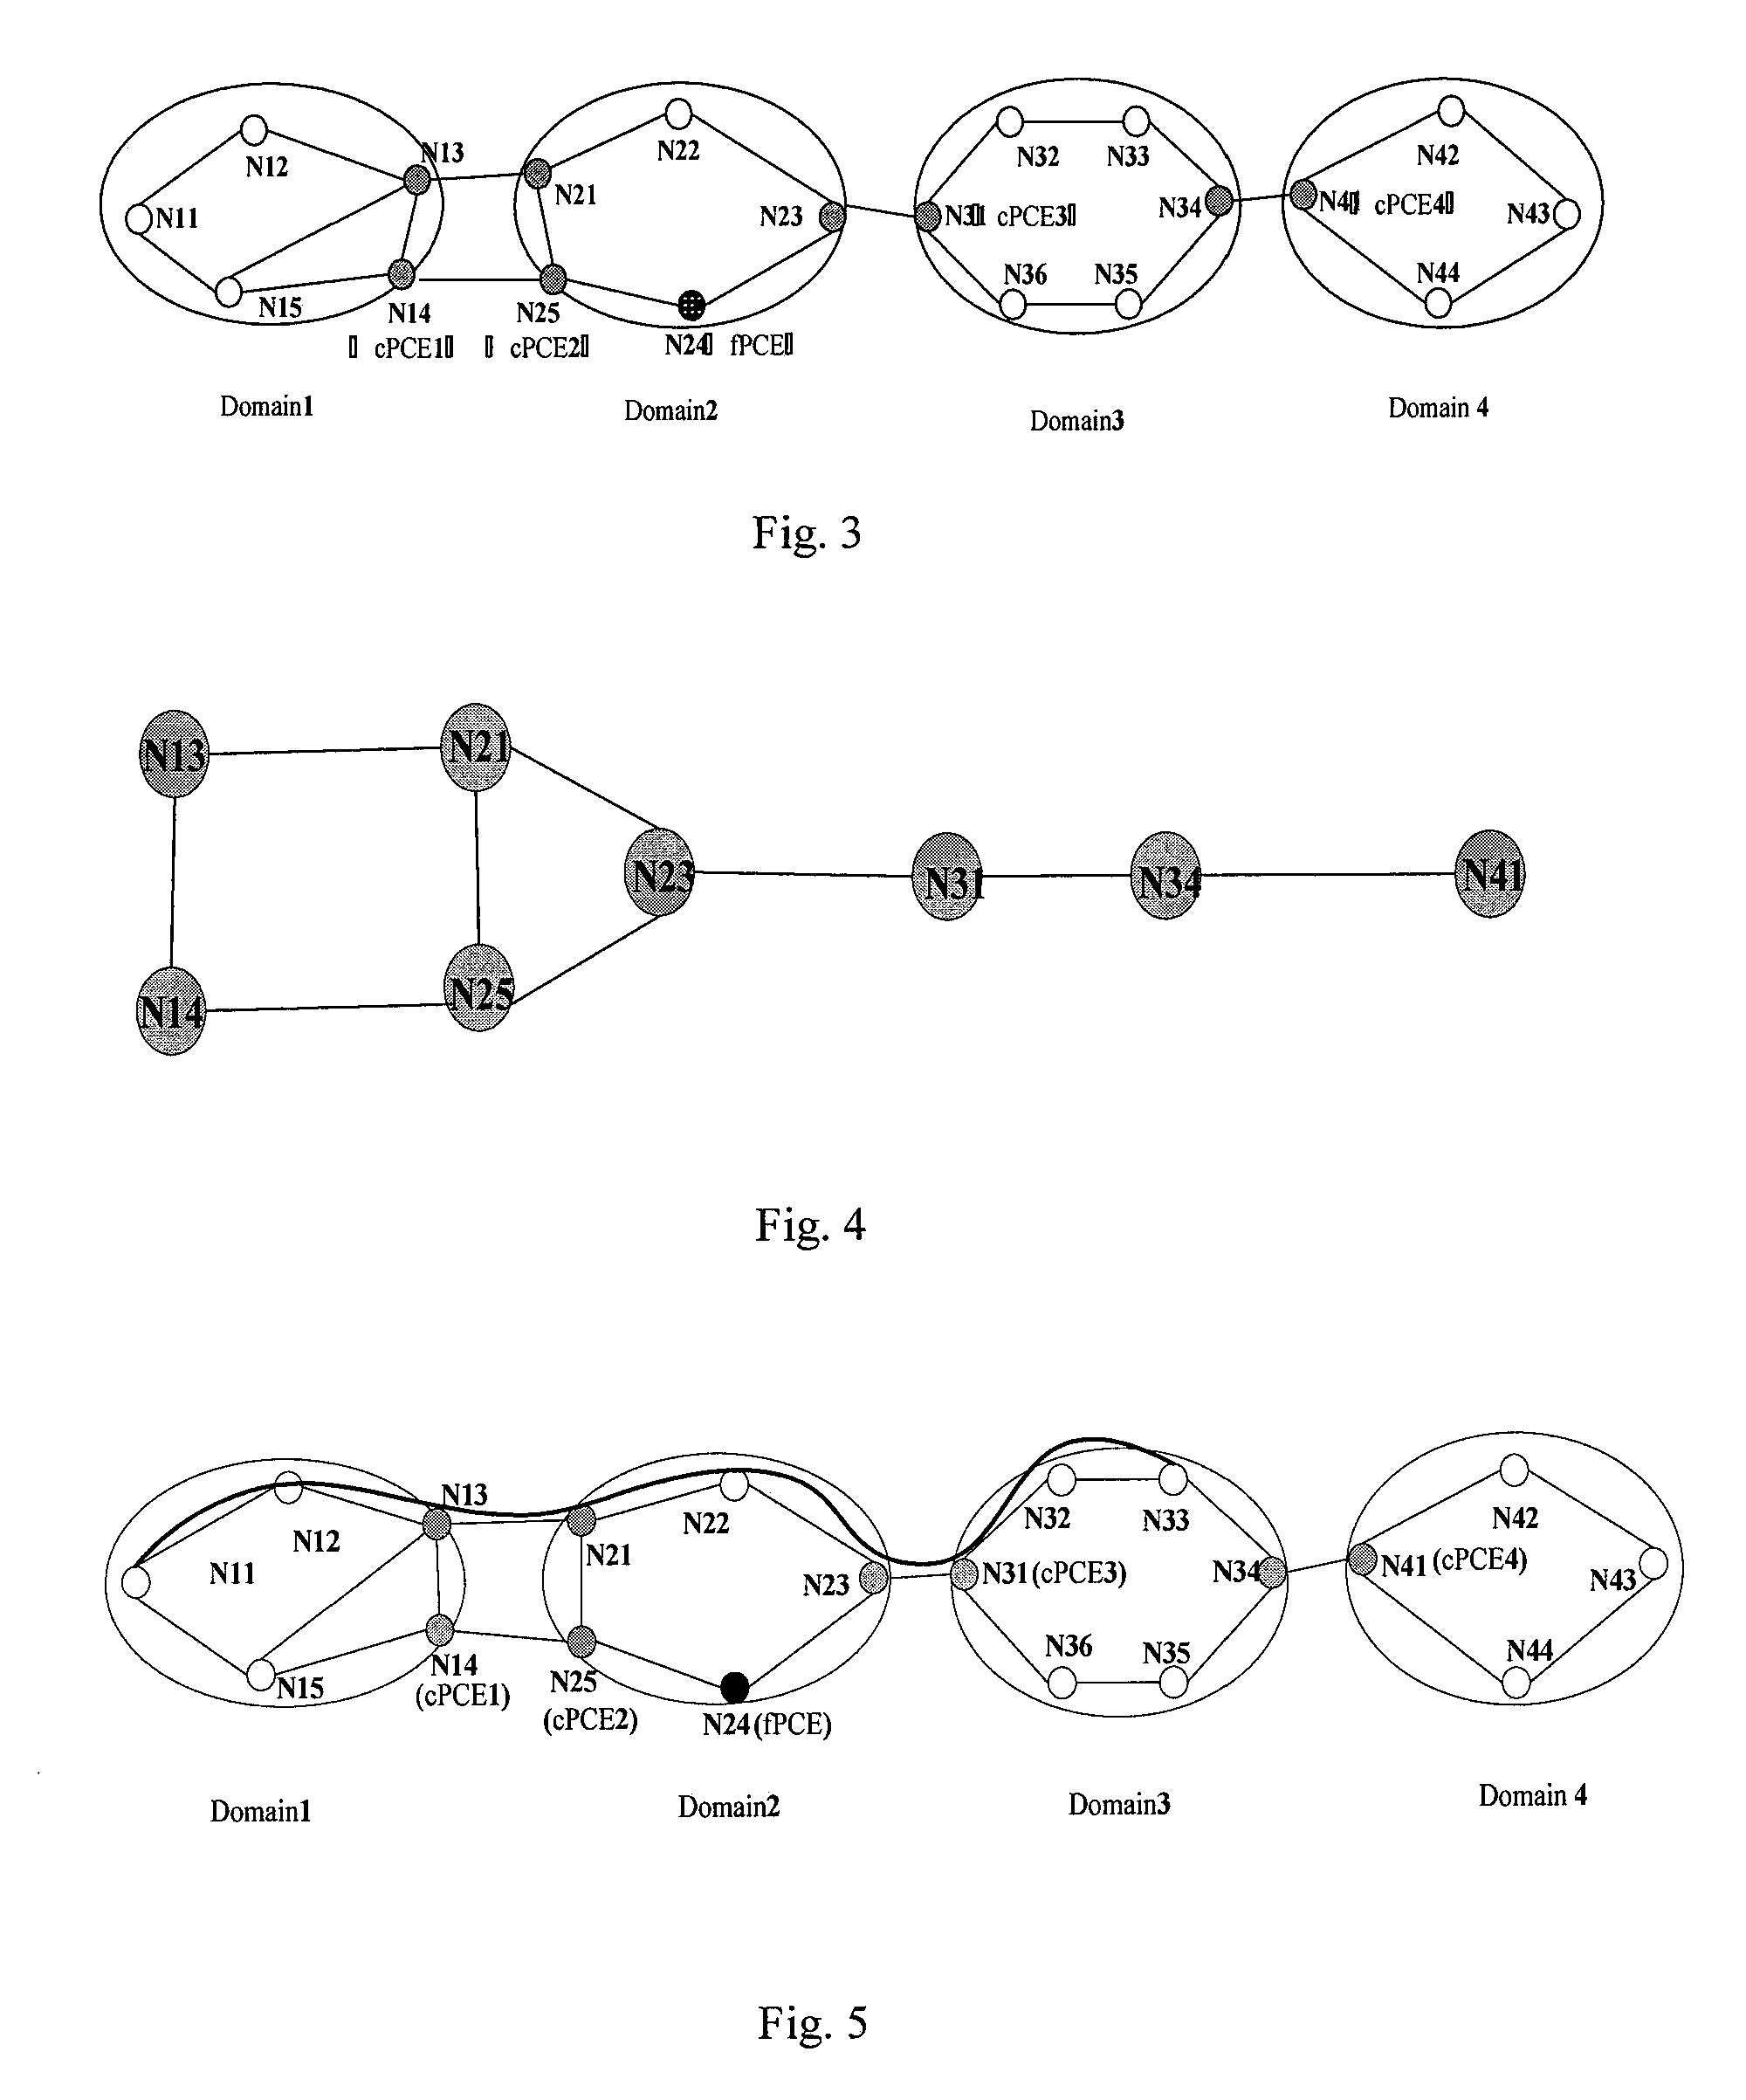 Method for Establishing an Inter-Domain Path that Satisfies Wavelength Continuity Constraint